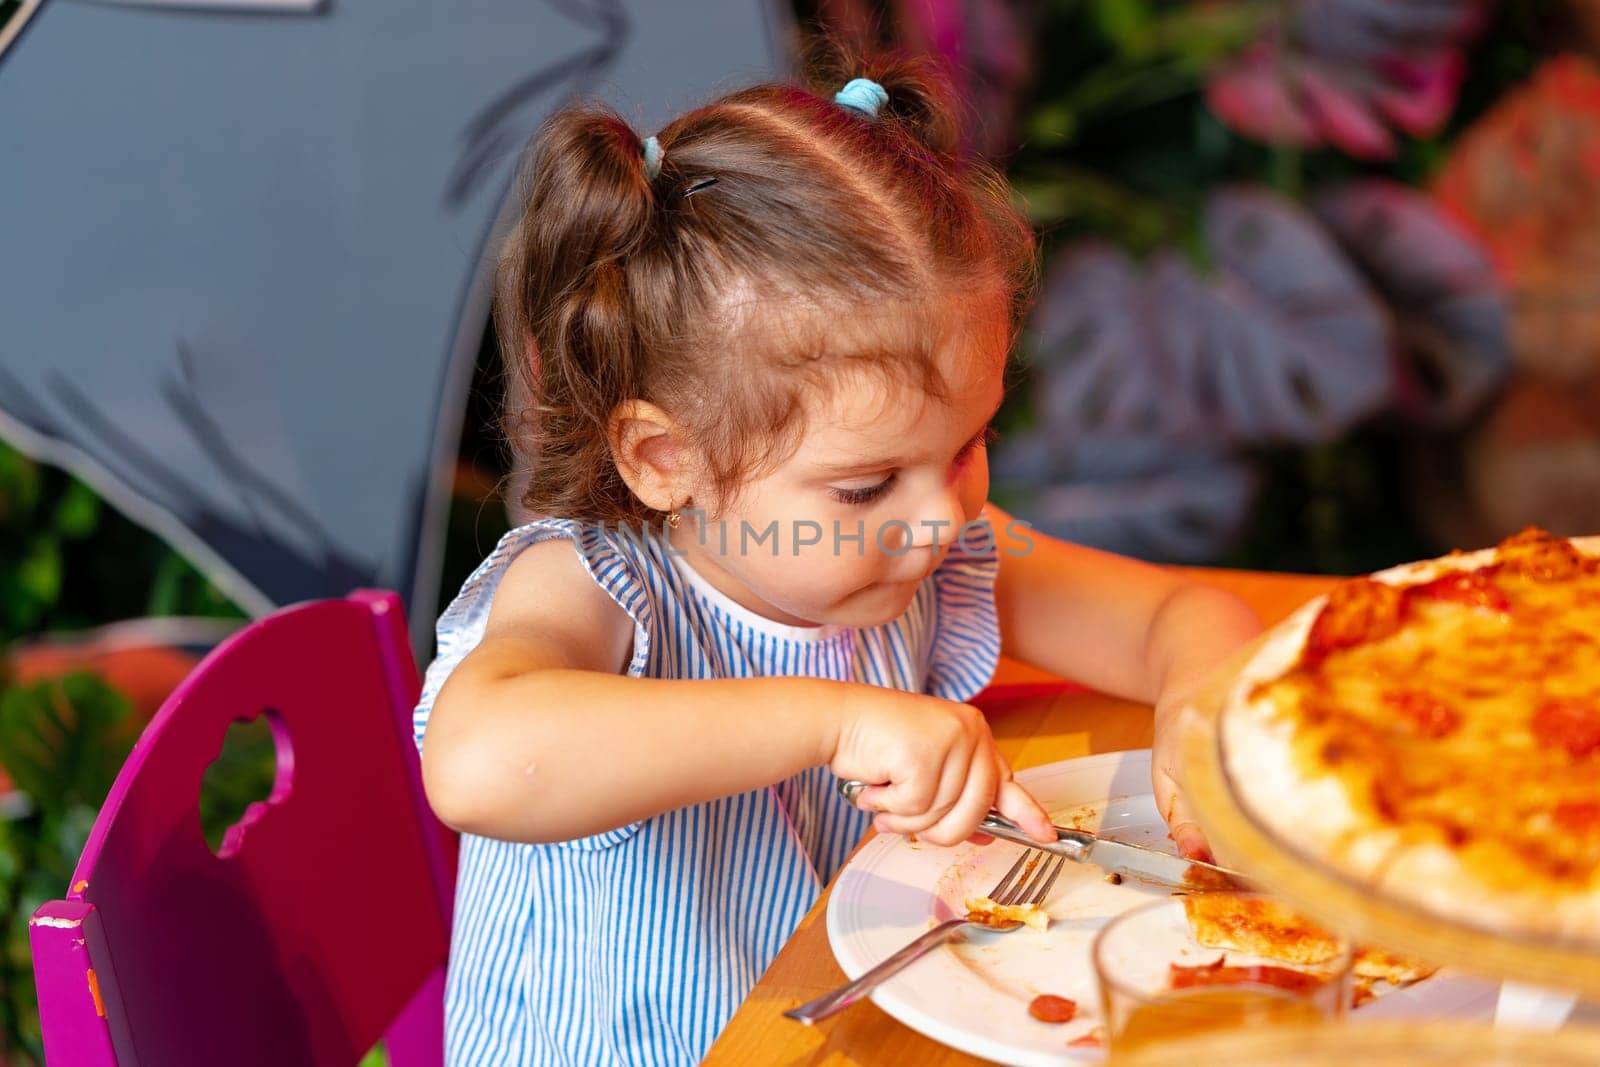 A young girl with light hair is captured in the moment of eating a slice of cheesy pizza, while another child is seated next to her, slightly out of focus. The scene suggests a casual birthday party setting with children enjoying food.